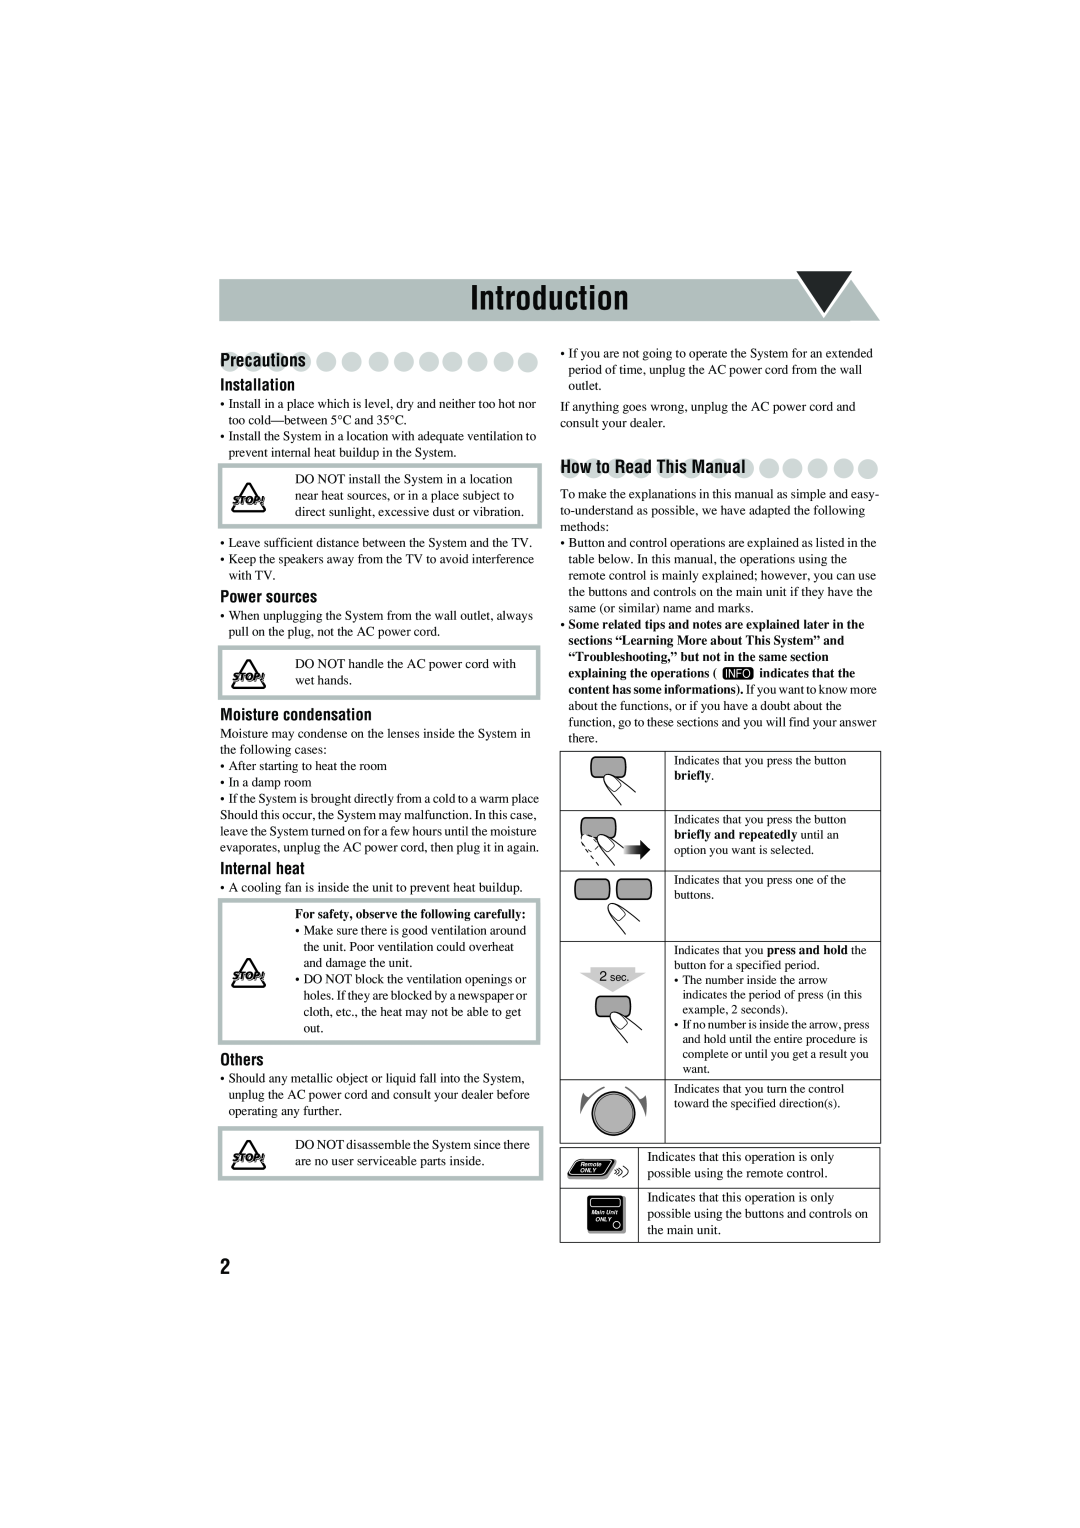 JVC CA-MXJD8UW Introduction, Precautions, How to Read This Manual, Installation, Power sources, Moisture condensation 